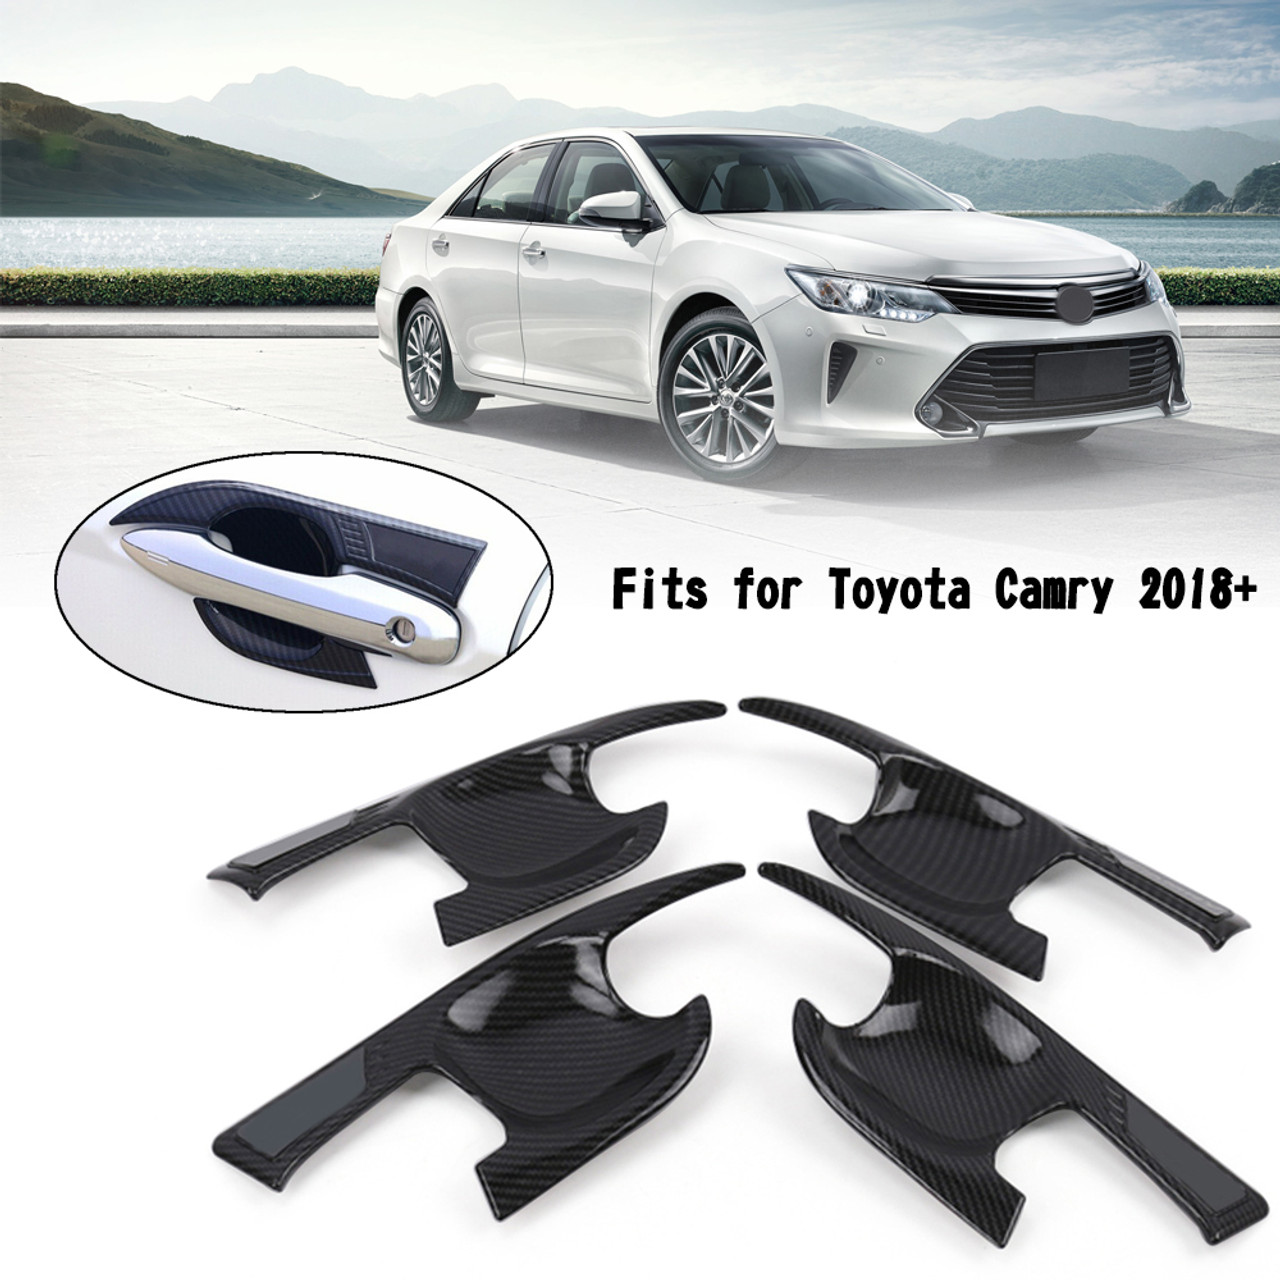 4x Door Handle Bowl Cover Trim Fit for Toyota Camry 2018+ Carbon Fiber